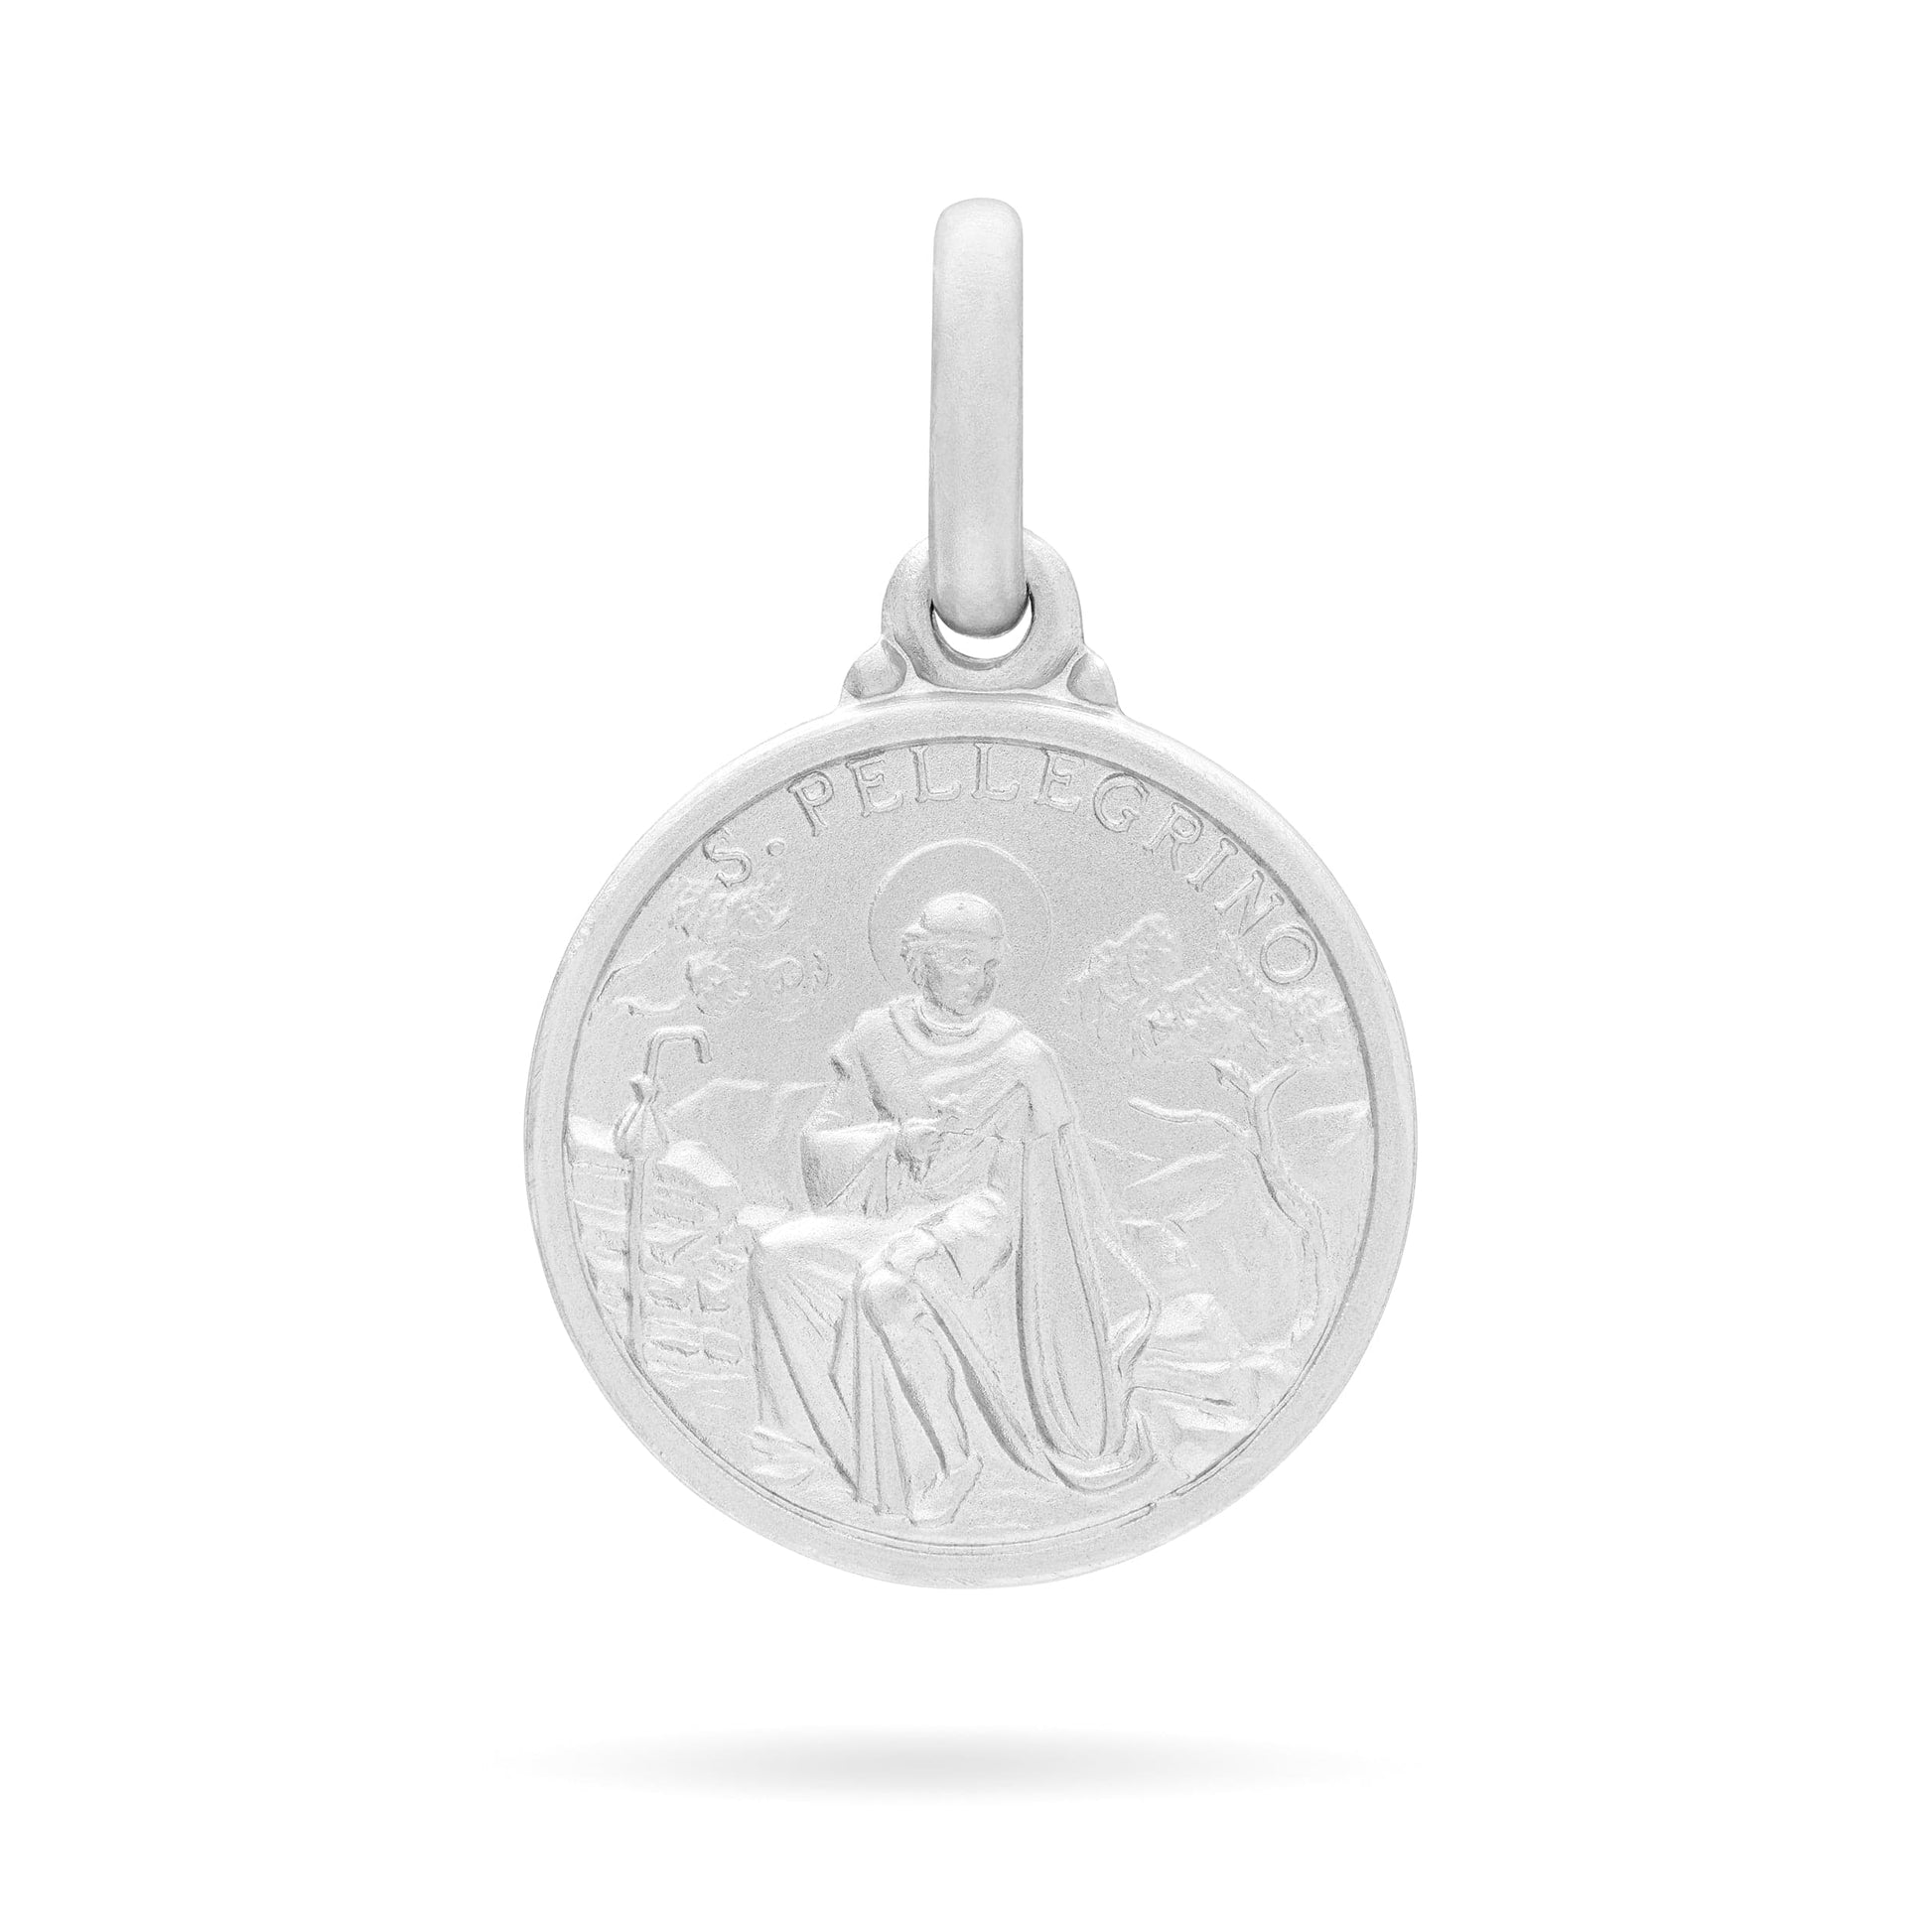 MONDO CATTOLICO Medal Silver Medal of Saint Peregrine